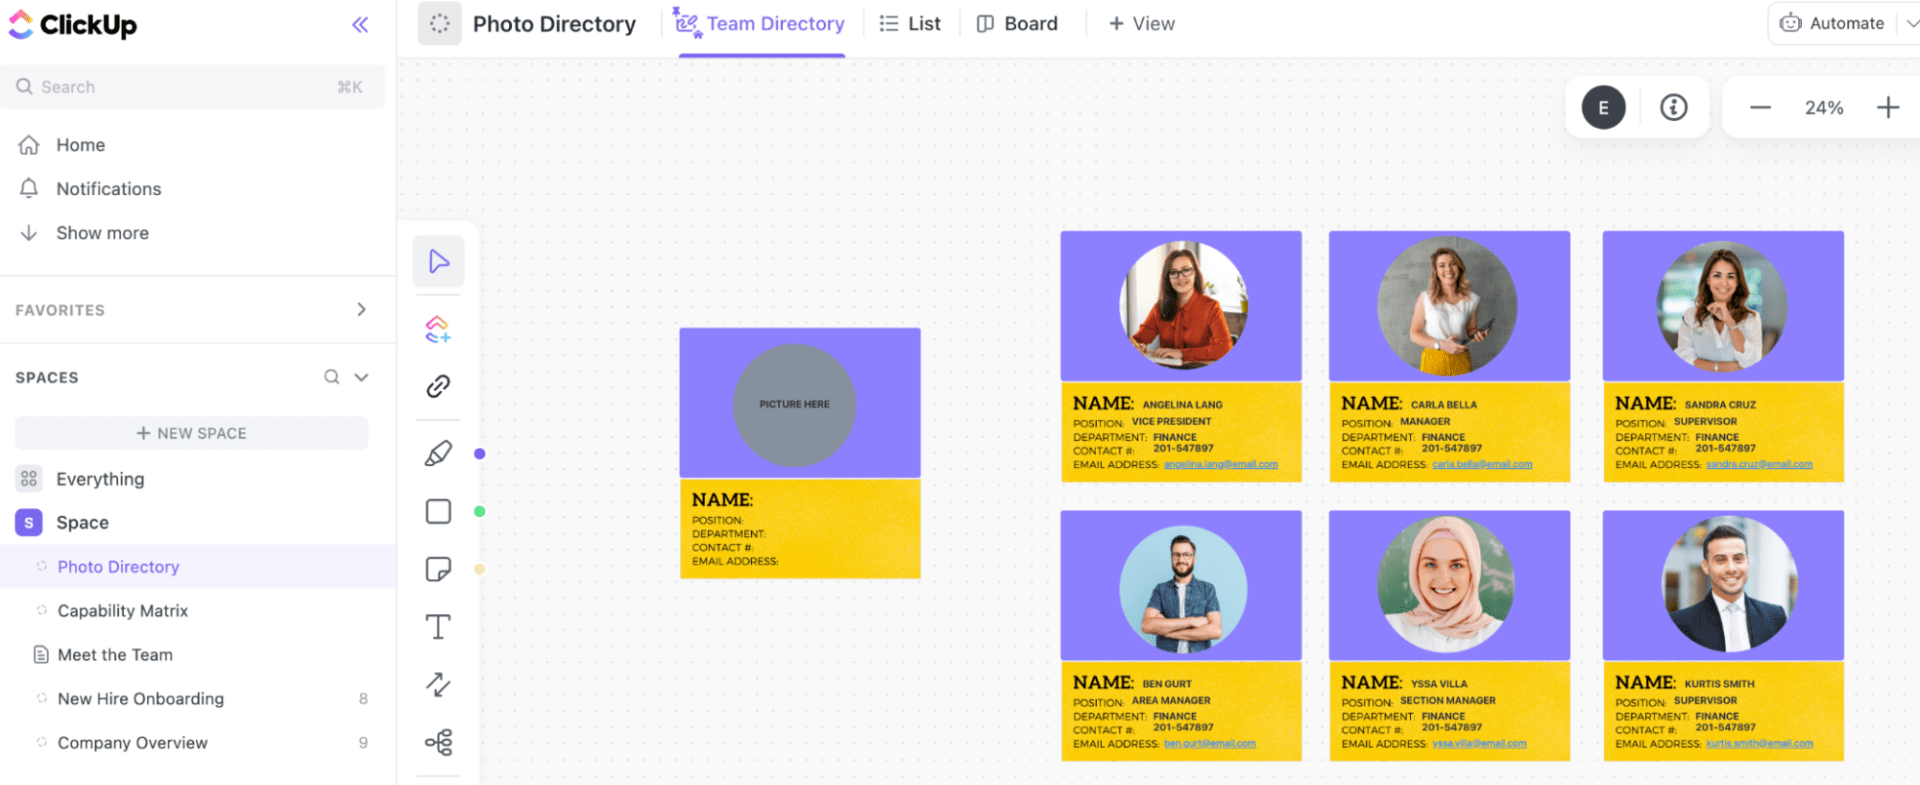 ClickUp Photo Directory Template 